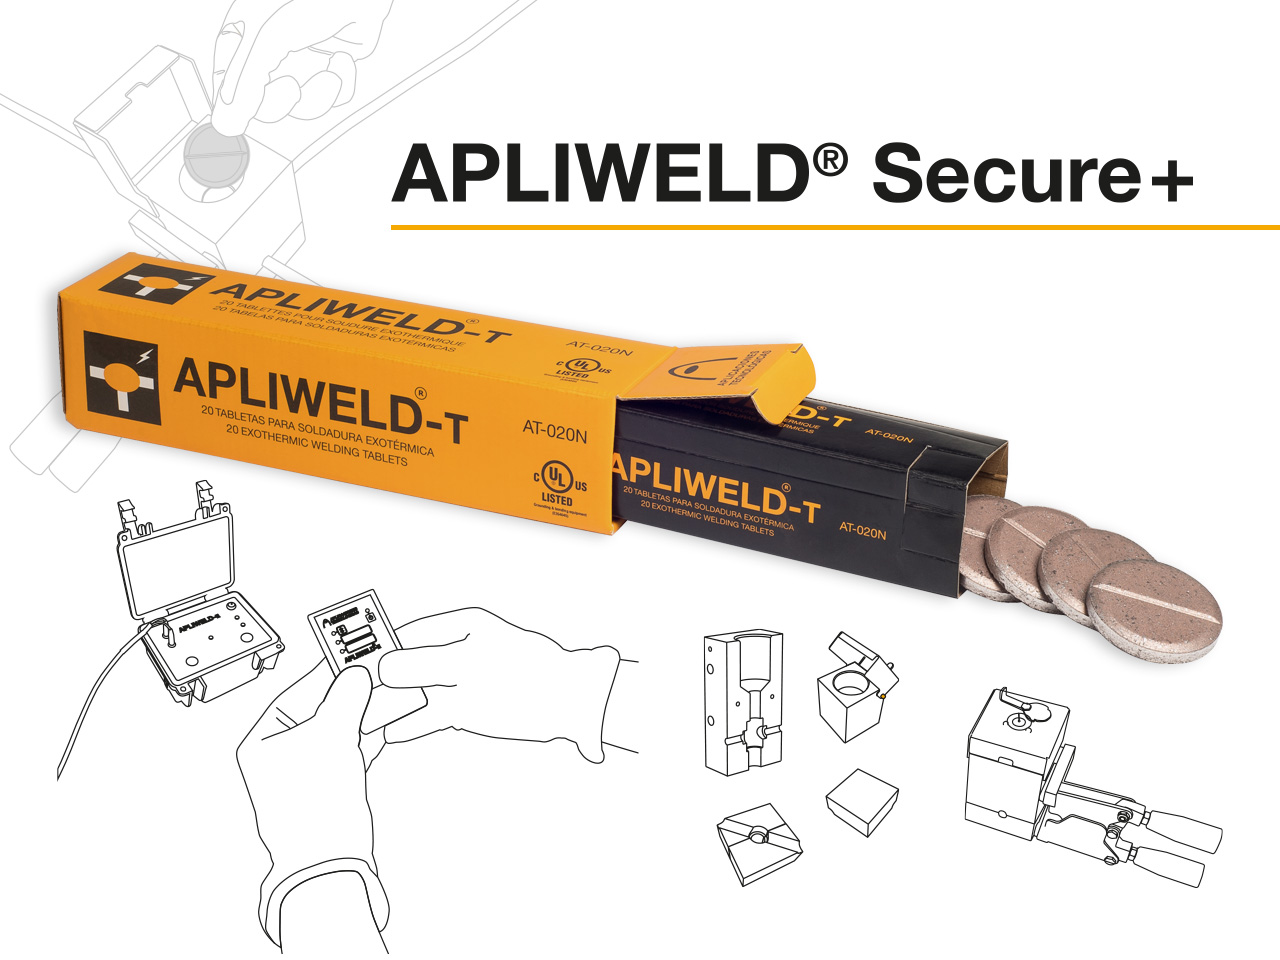 Apliweld® Secure+: the exothermic welding in tablet format with wireless ignition |New videos of the procedure on how to use the specific mould and the multiple graphite mould